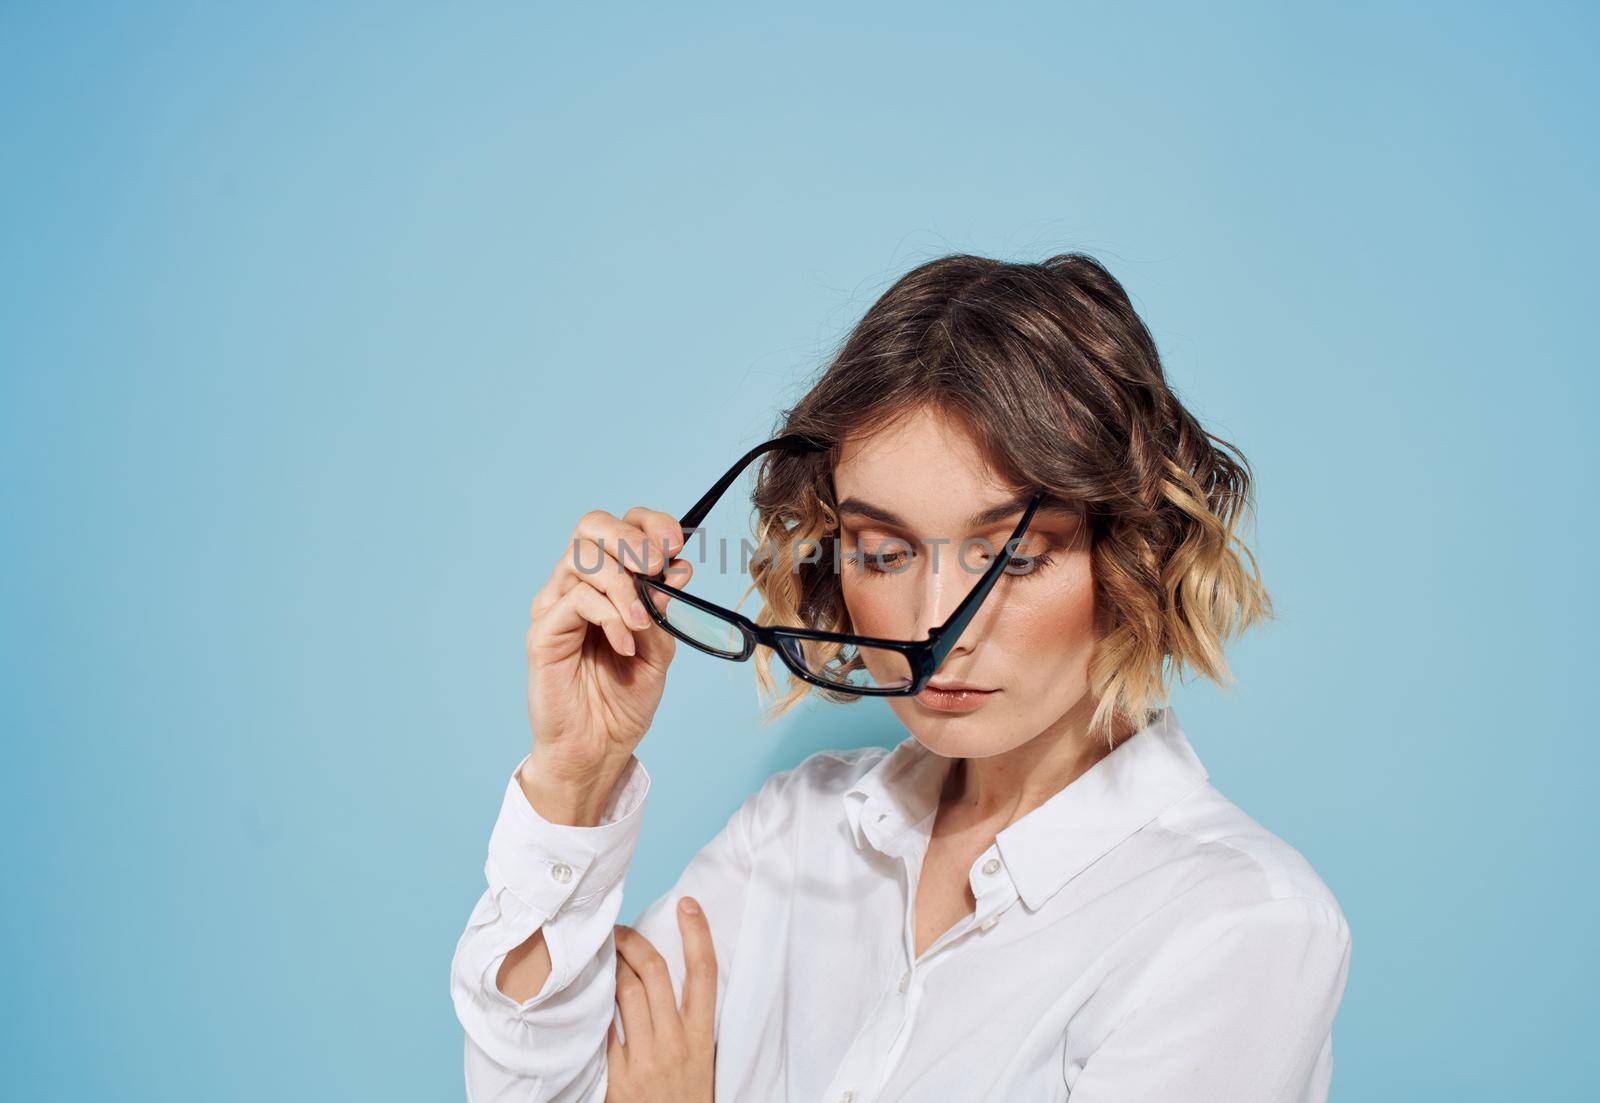 Fashionable woman curly hair short haired glasses and white shirt blue background by SHOTPRIME